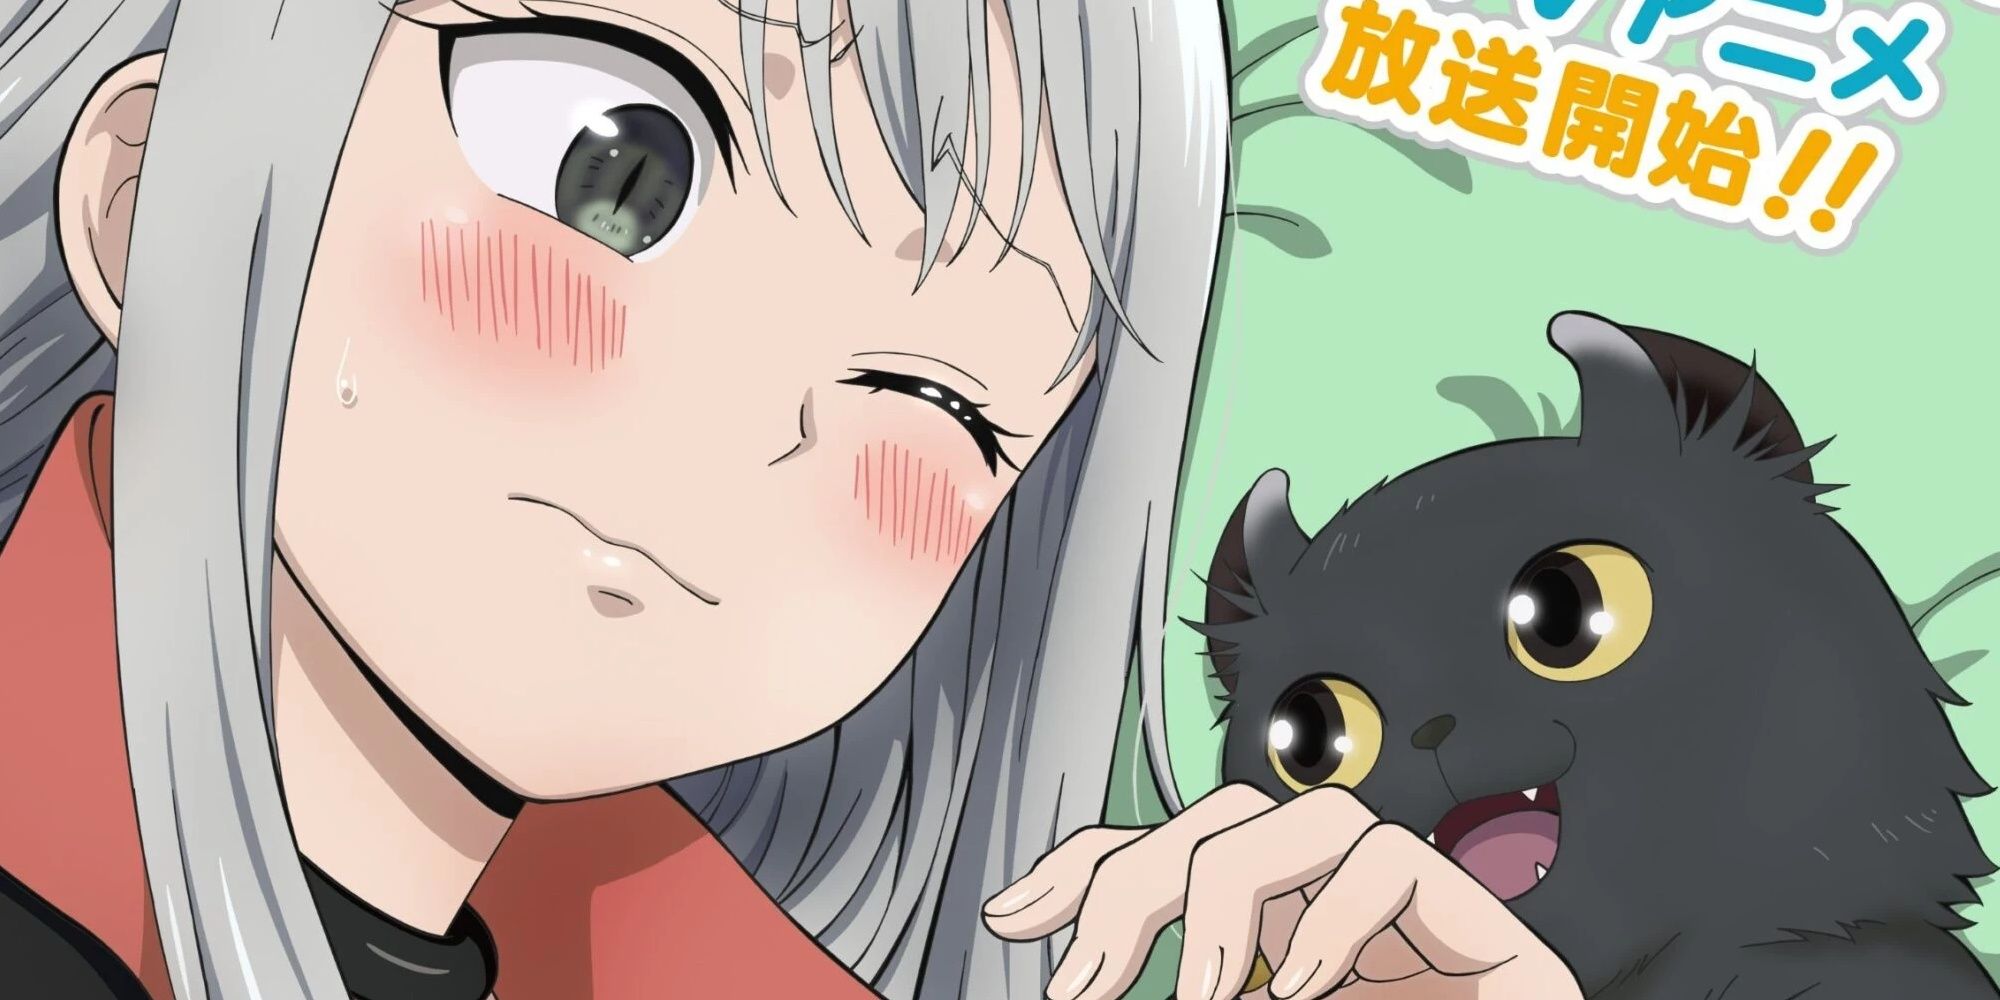 Screenshot of a while haired anime girl with a black cat